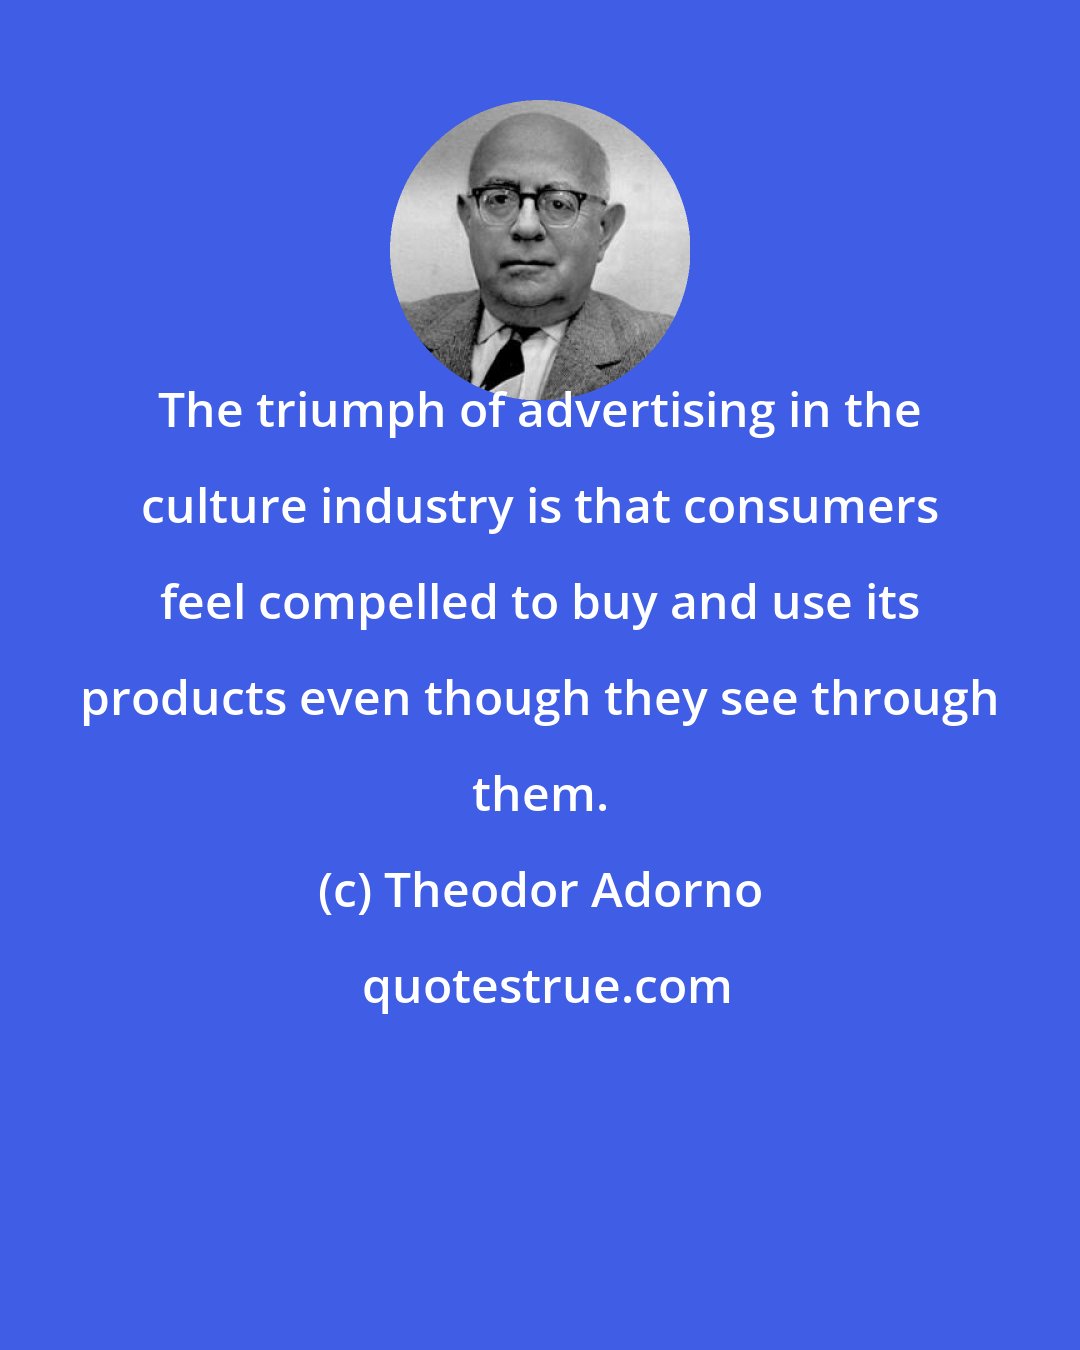 Theodor Adorno: The triumph of advertising in the culture industry is that consumers feel compelled to buy and use its products even though they see through them.